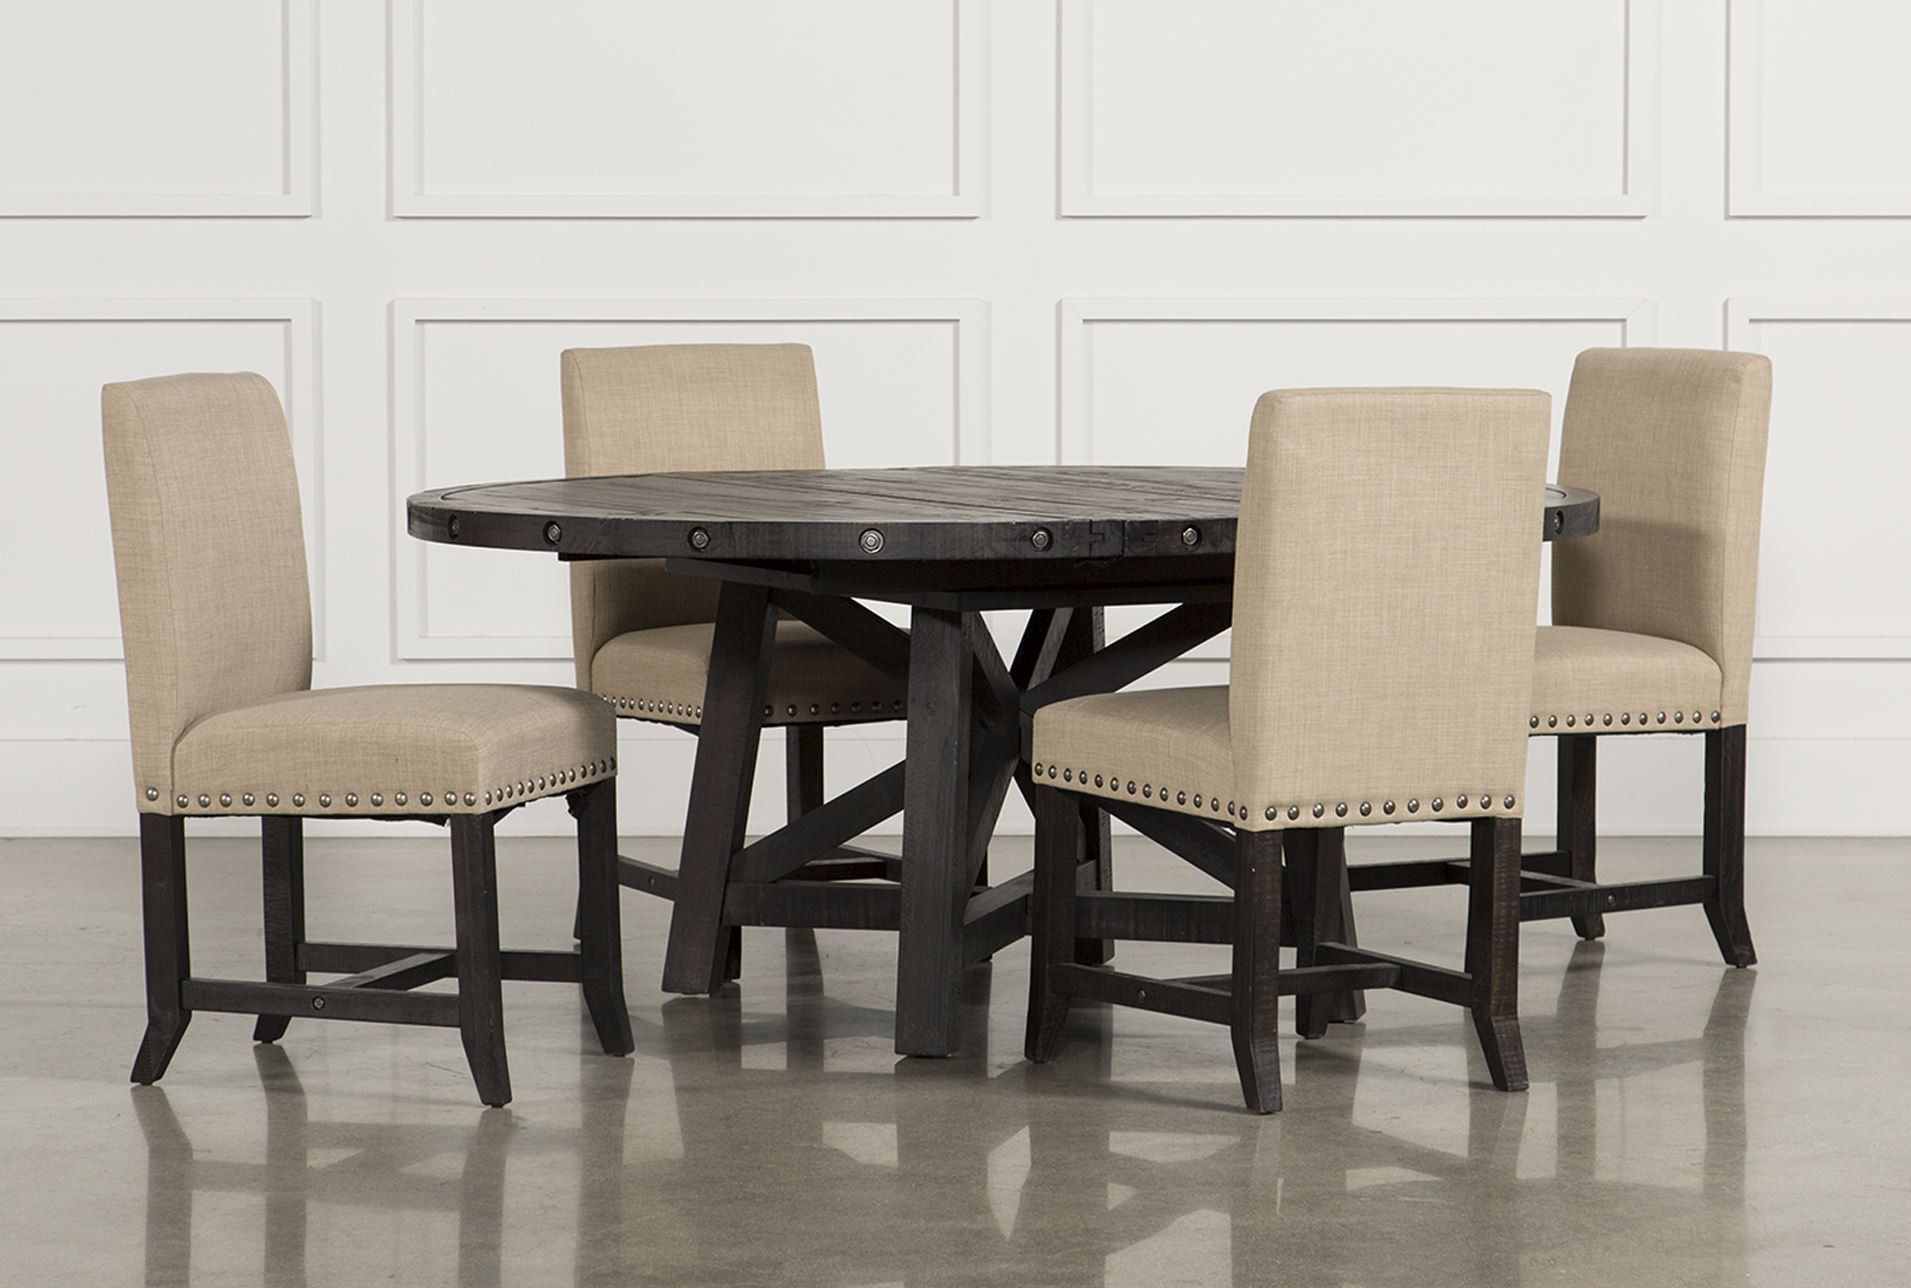 Living Spaces Dining Room Tables
 Jaxon 5 Piece Round Dining Set W Upholstered Chairs